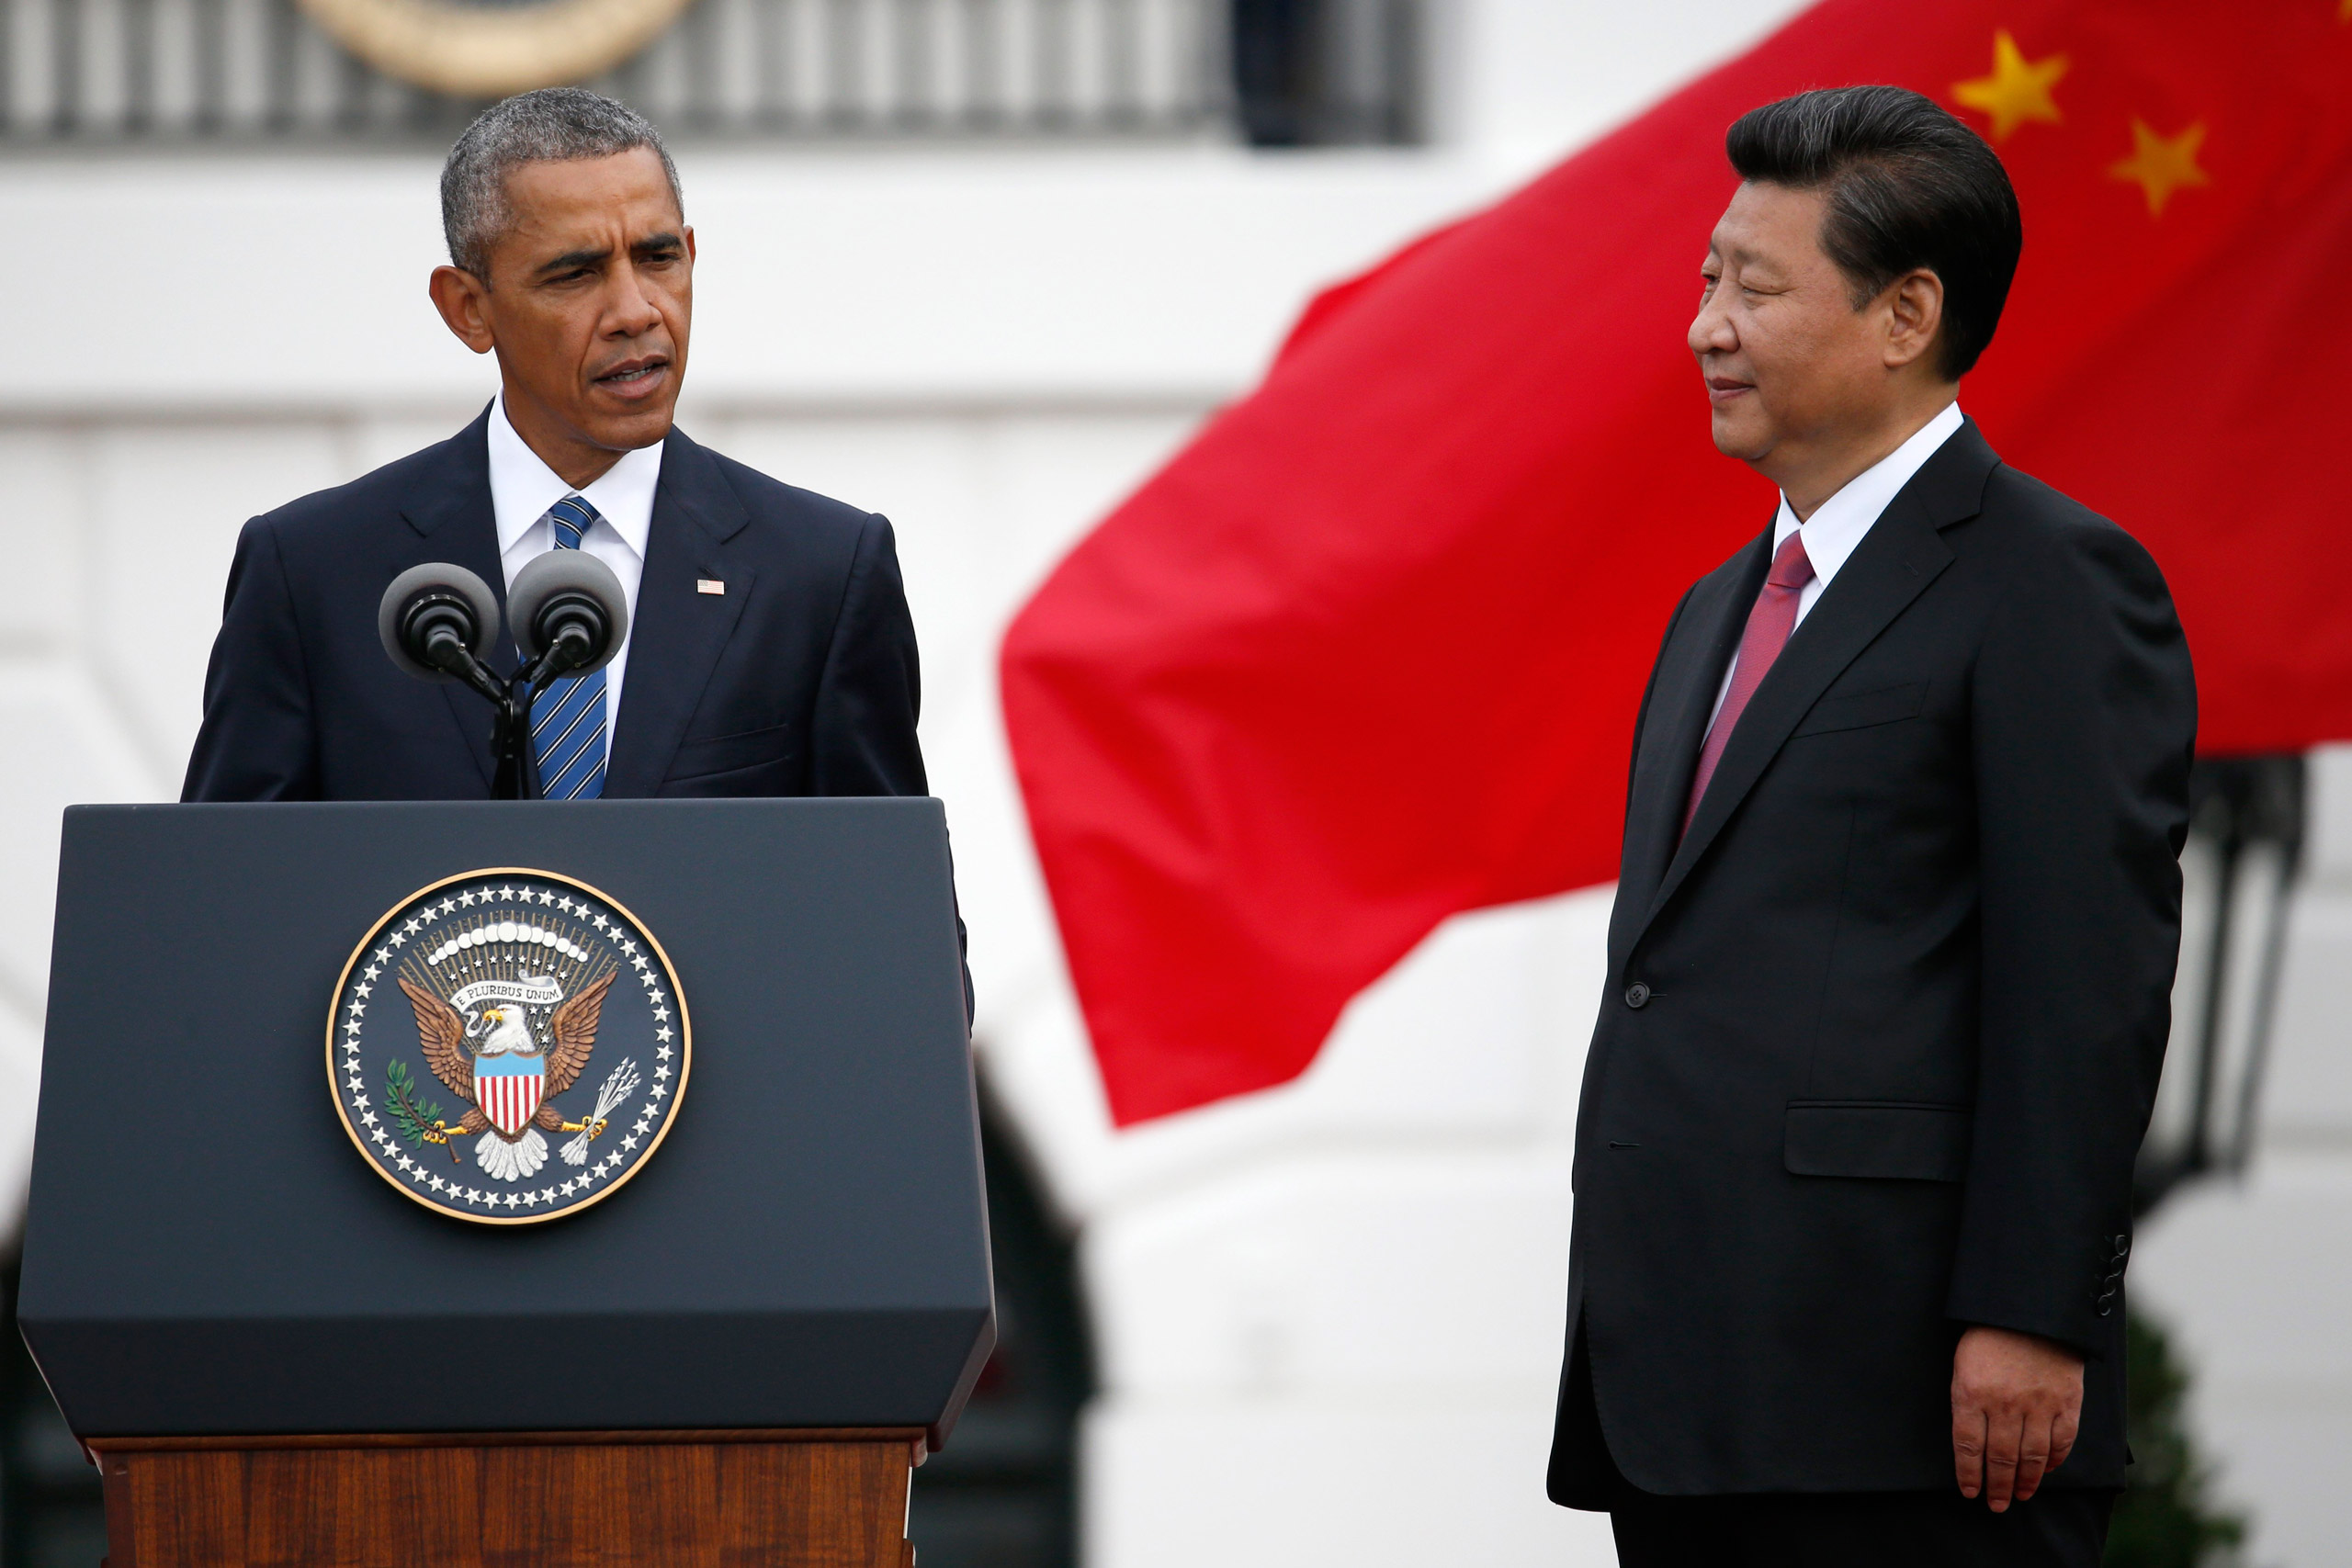 Chinese President Xi Jinping listens as President Barack Obama speaks during an official state arrival ceremony for the Chinese president at the White House in Washington on Sept. 25, 2015. (Evan Vucci—AP)